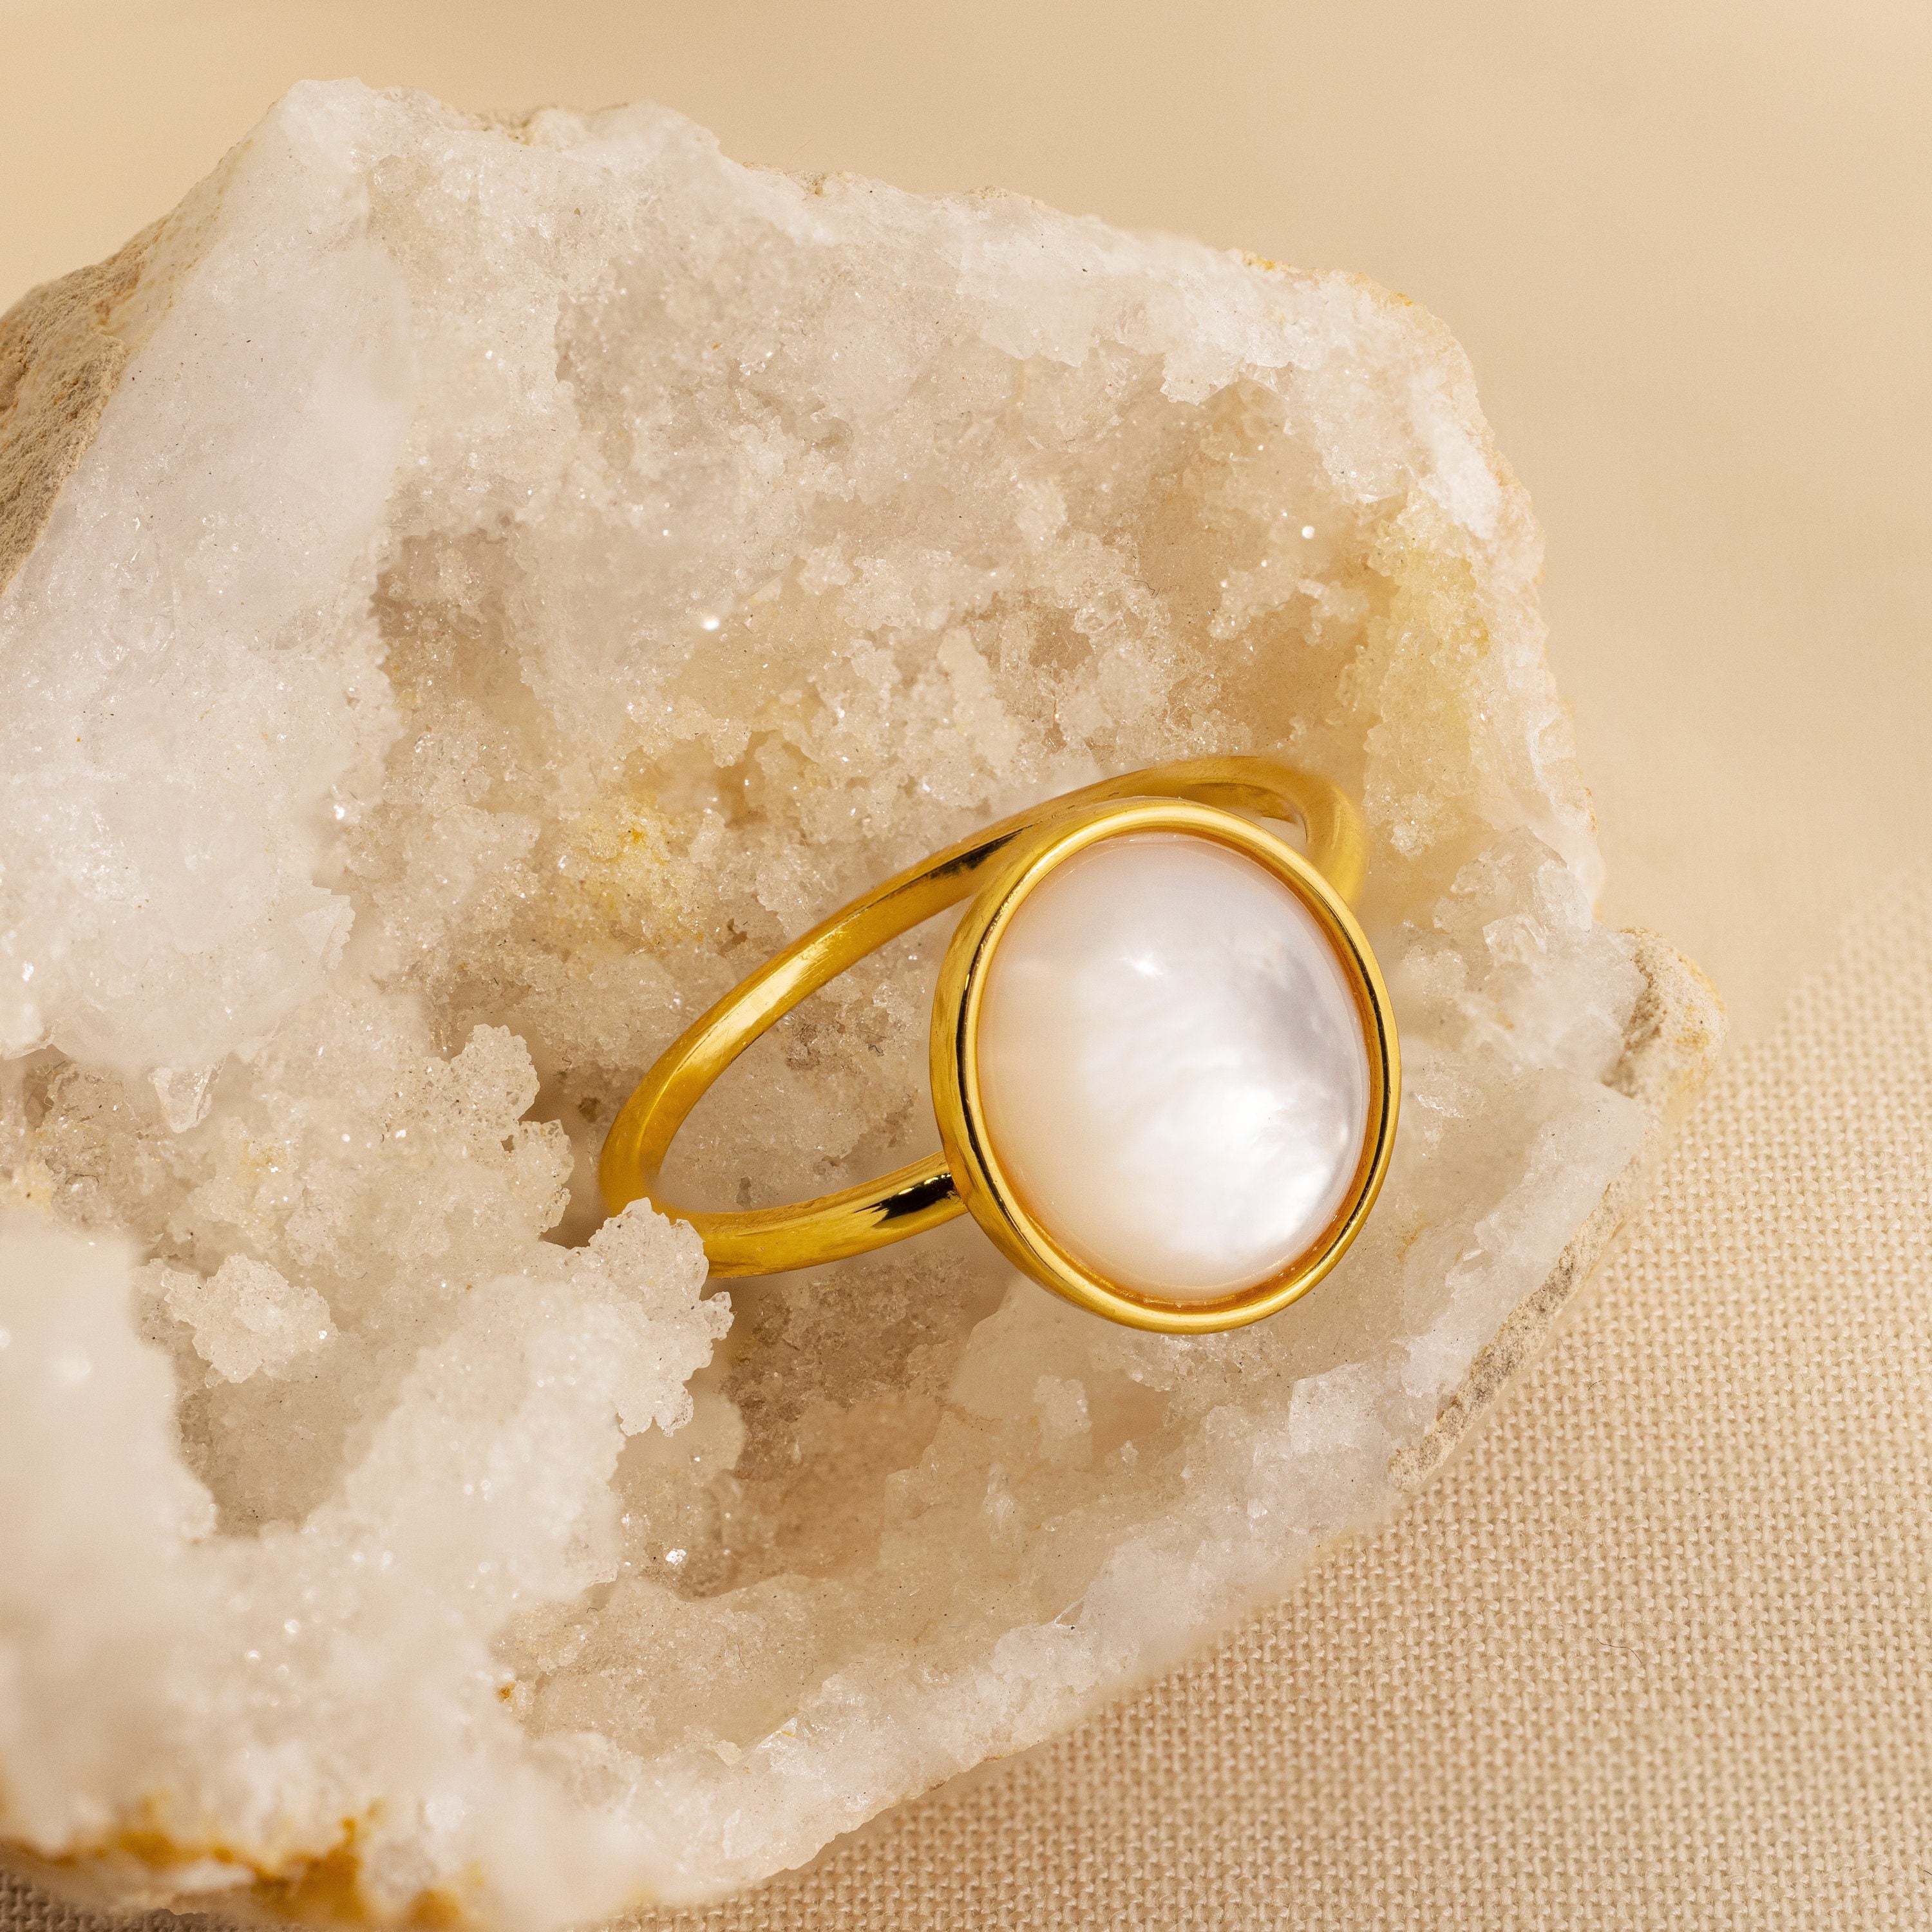 Mother of Pearl Signet Ring